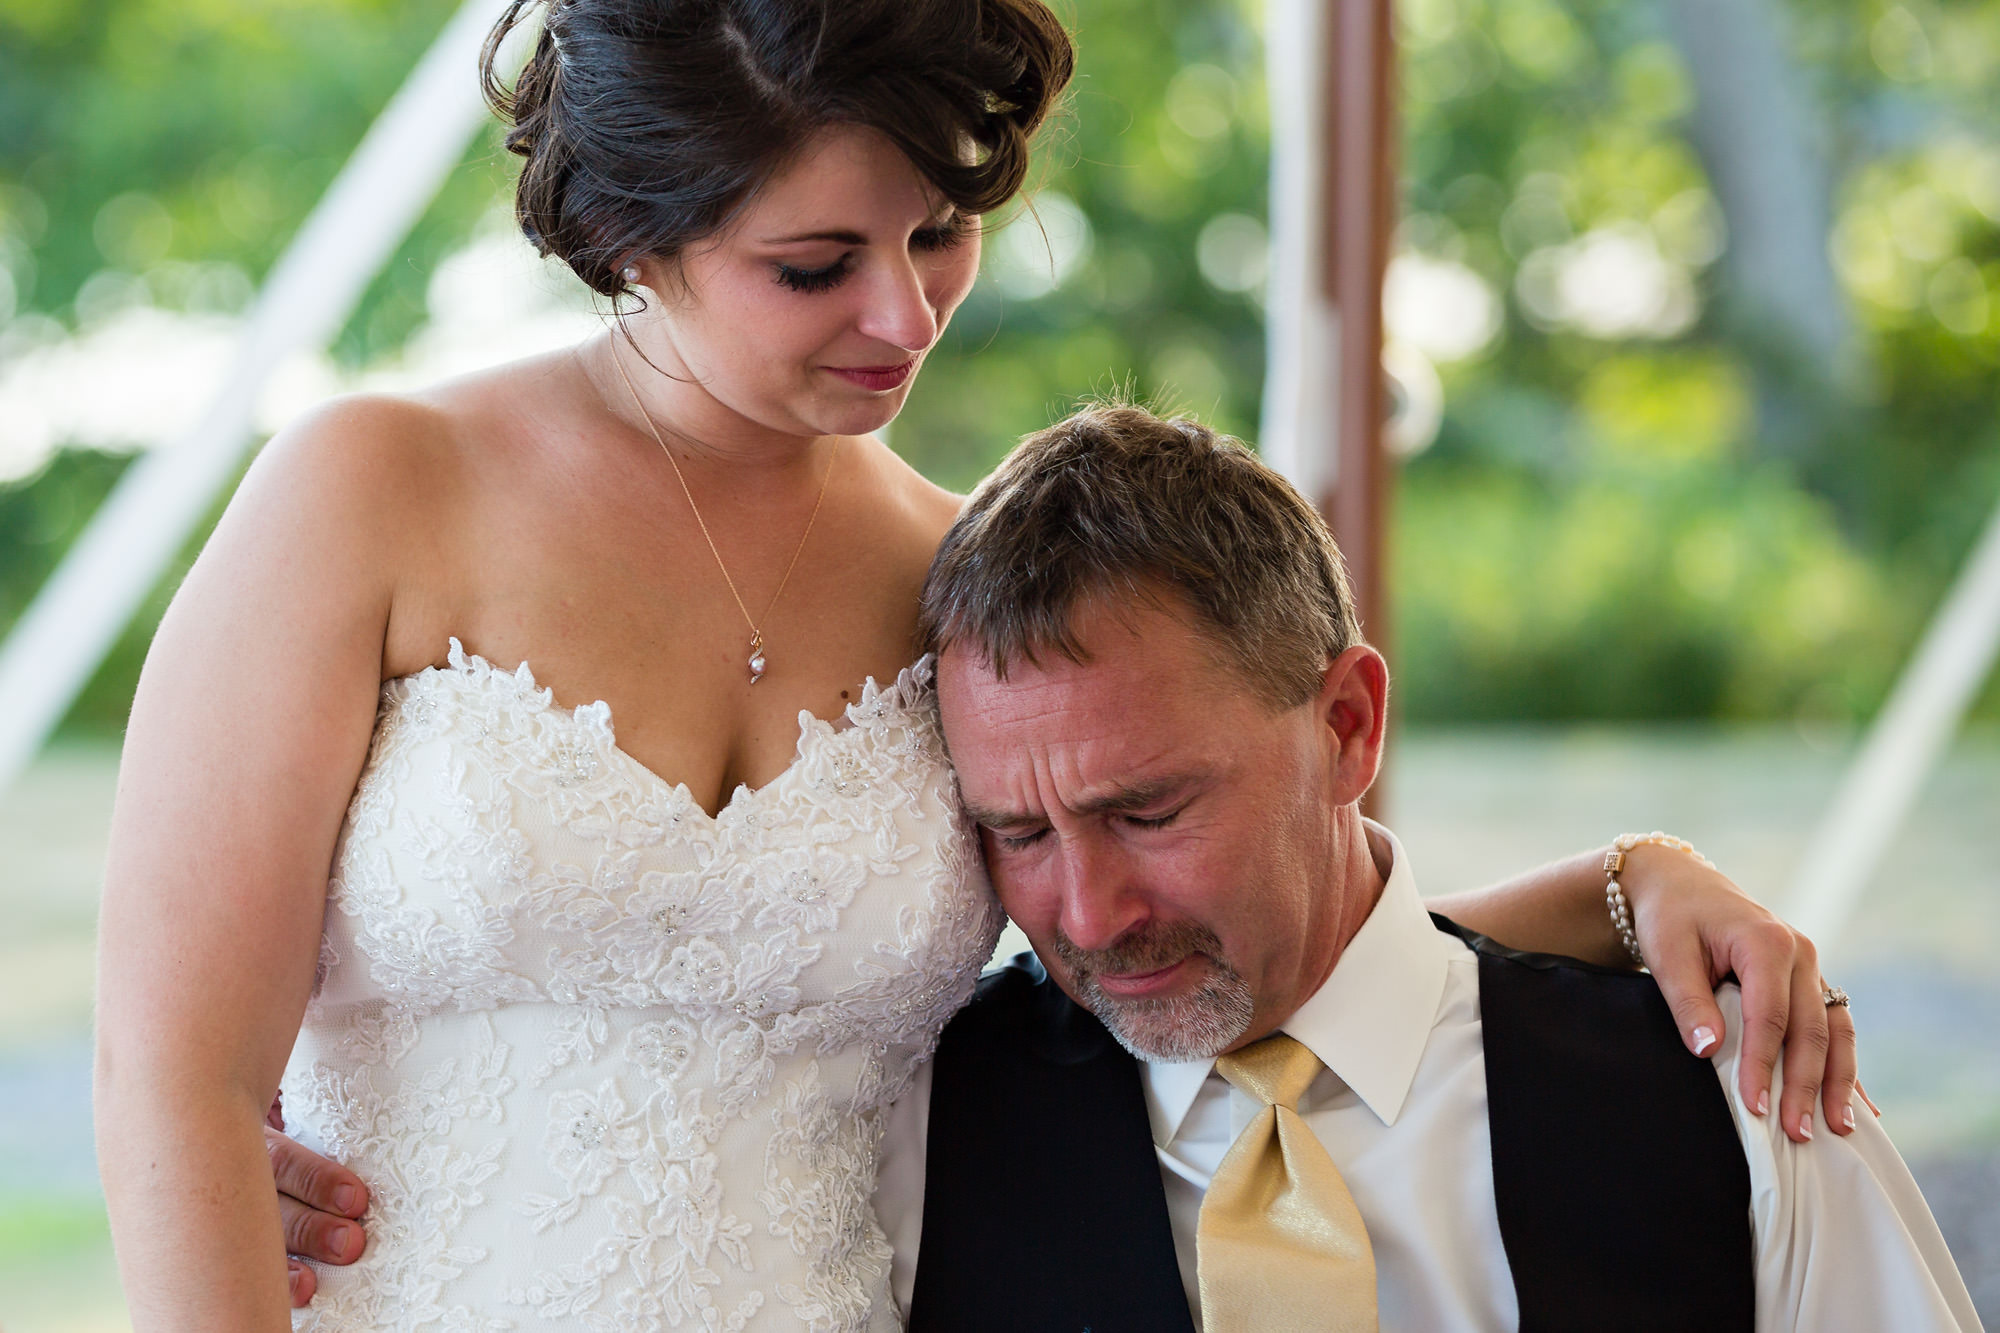 The bride's father breaks down at his daughter's wedding